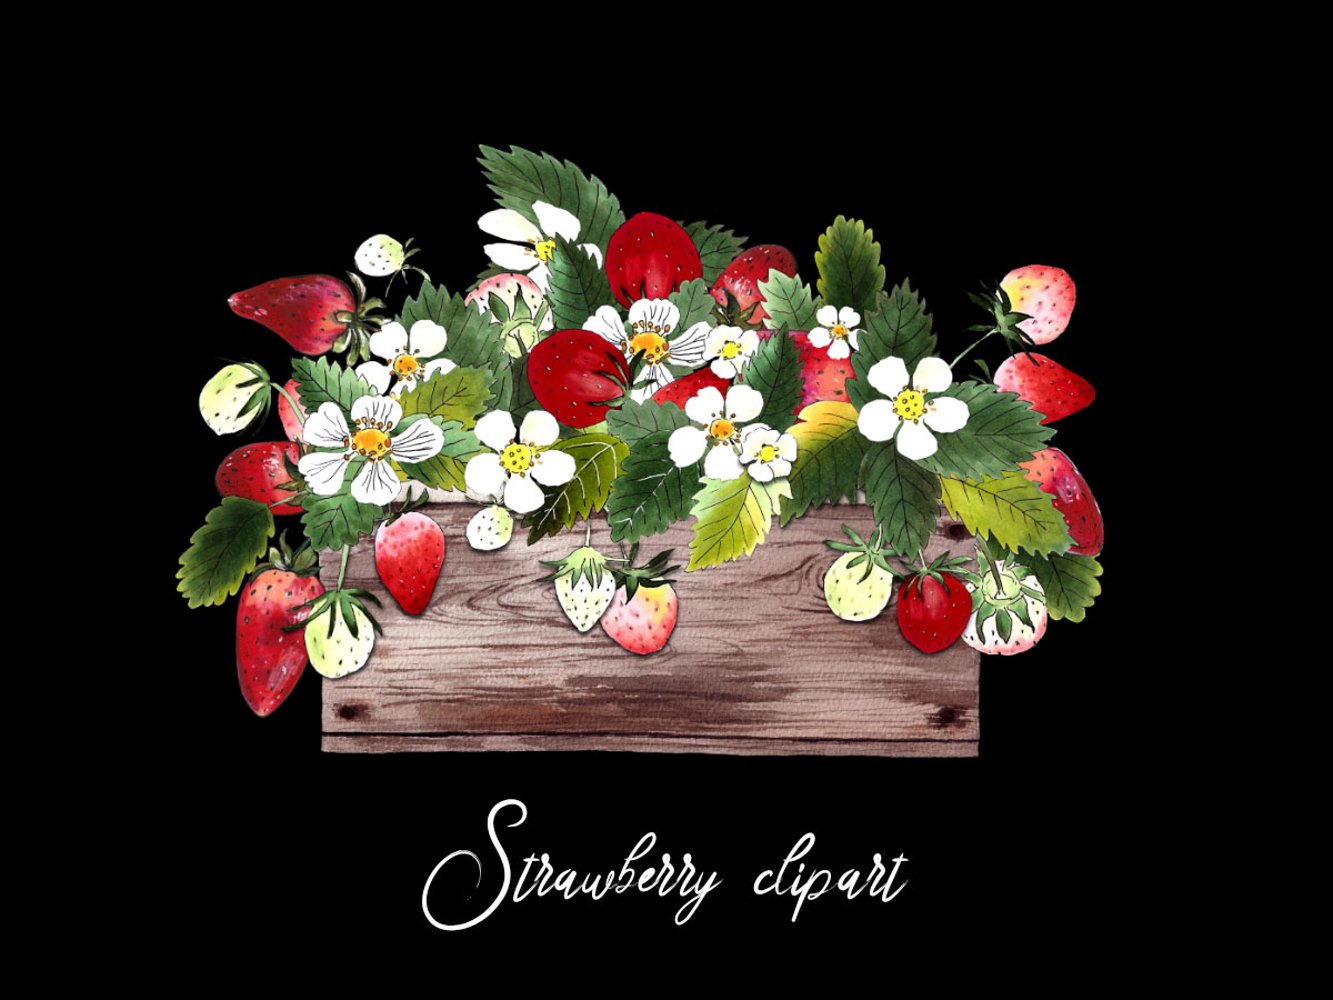 Strawberry clipart on the dark background.